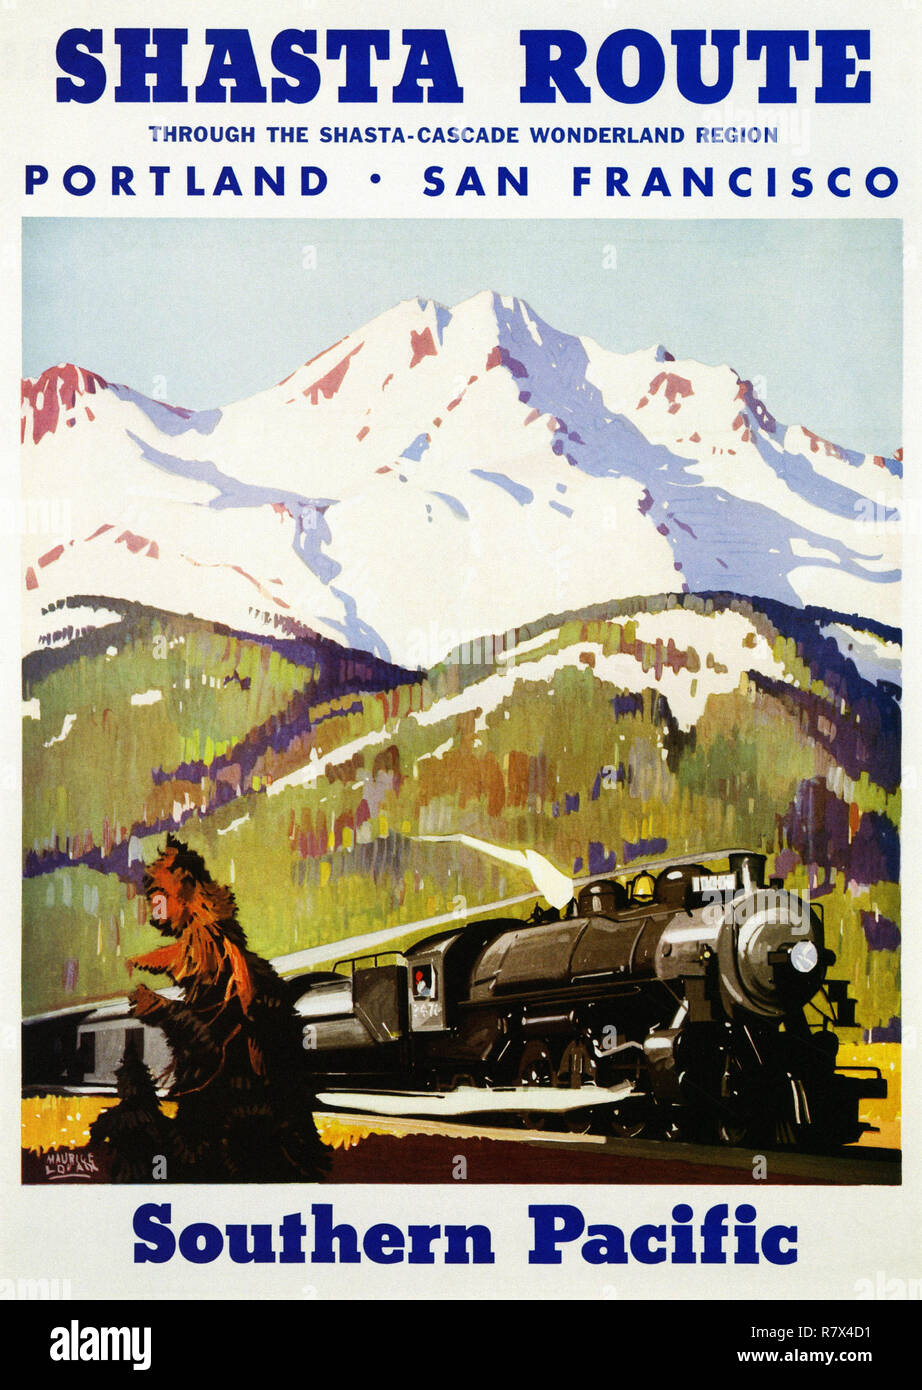 Southern Pacific Shasta Route - Vintage Travel Poster Stockfoto